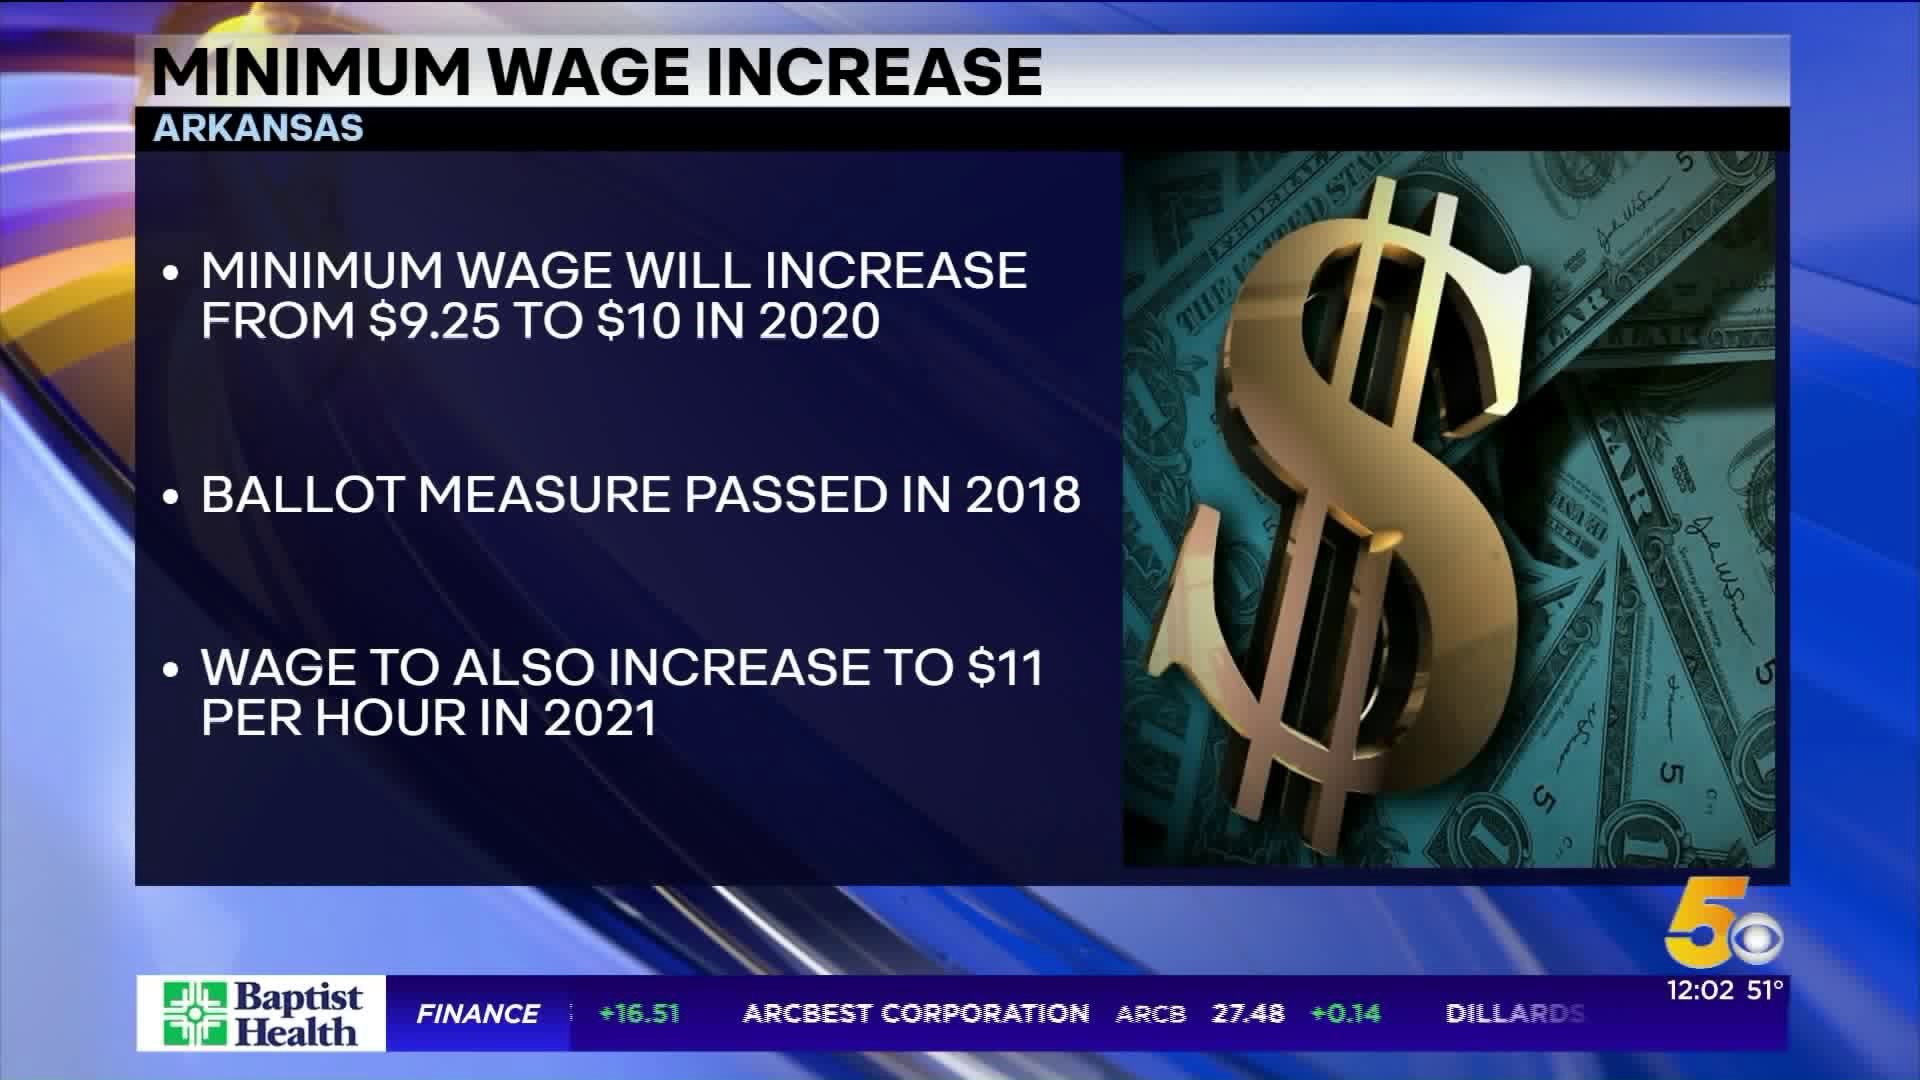 Arkansas’ Minimum Wage Will Increase To 10 Per Hour In 2020